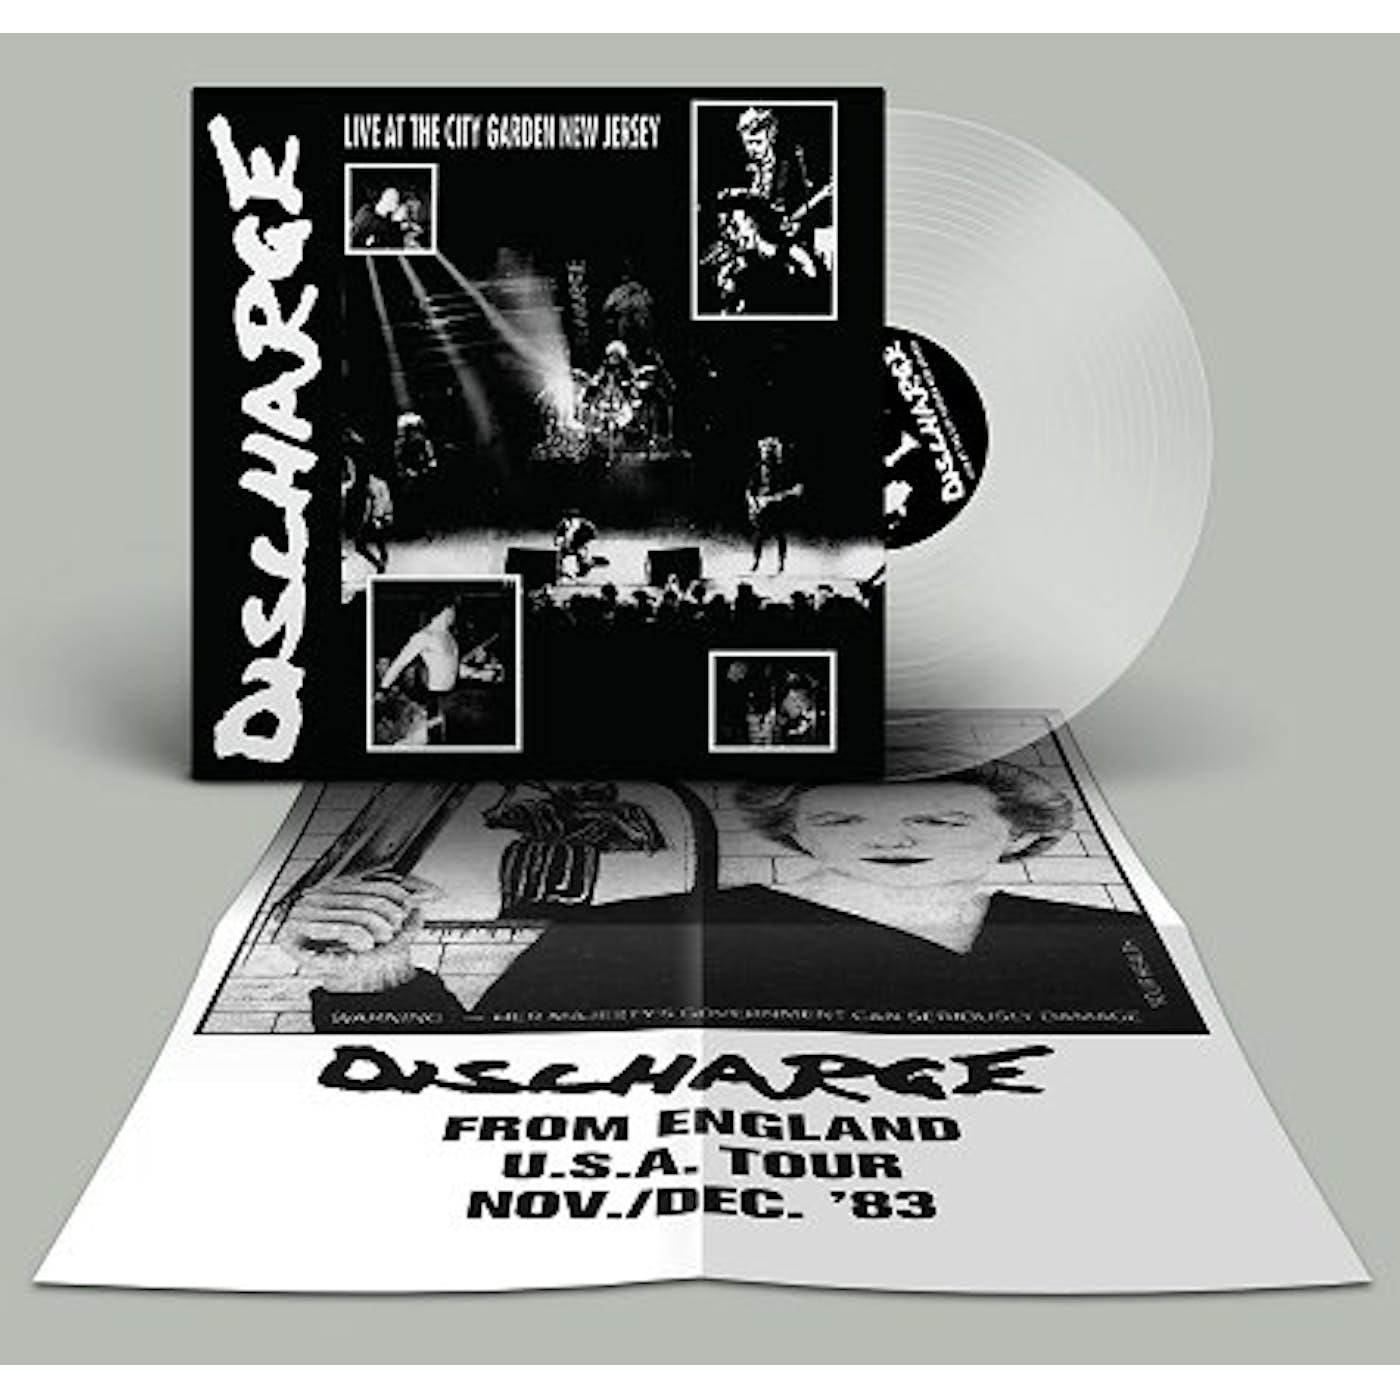 Discharge Live At City Garden New Jersey (Clear Vinyl)